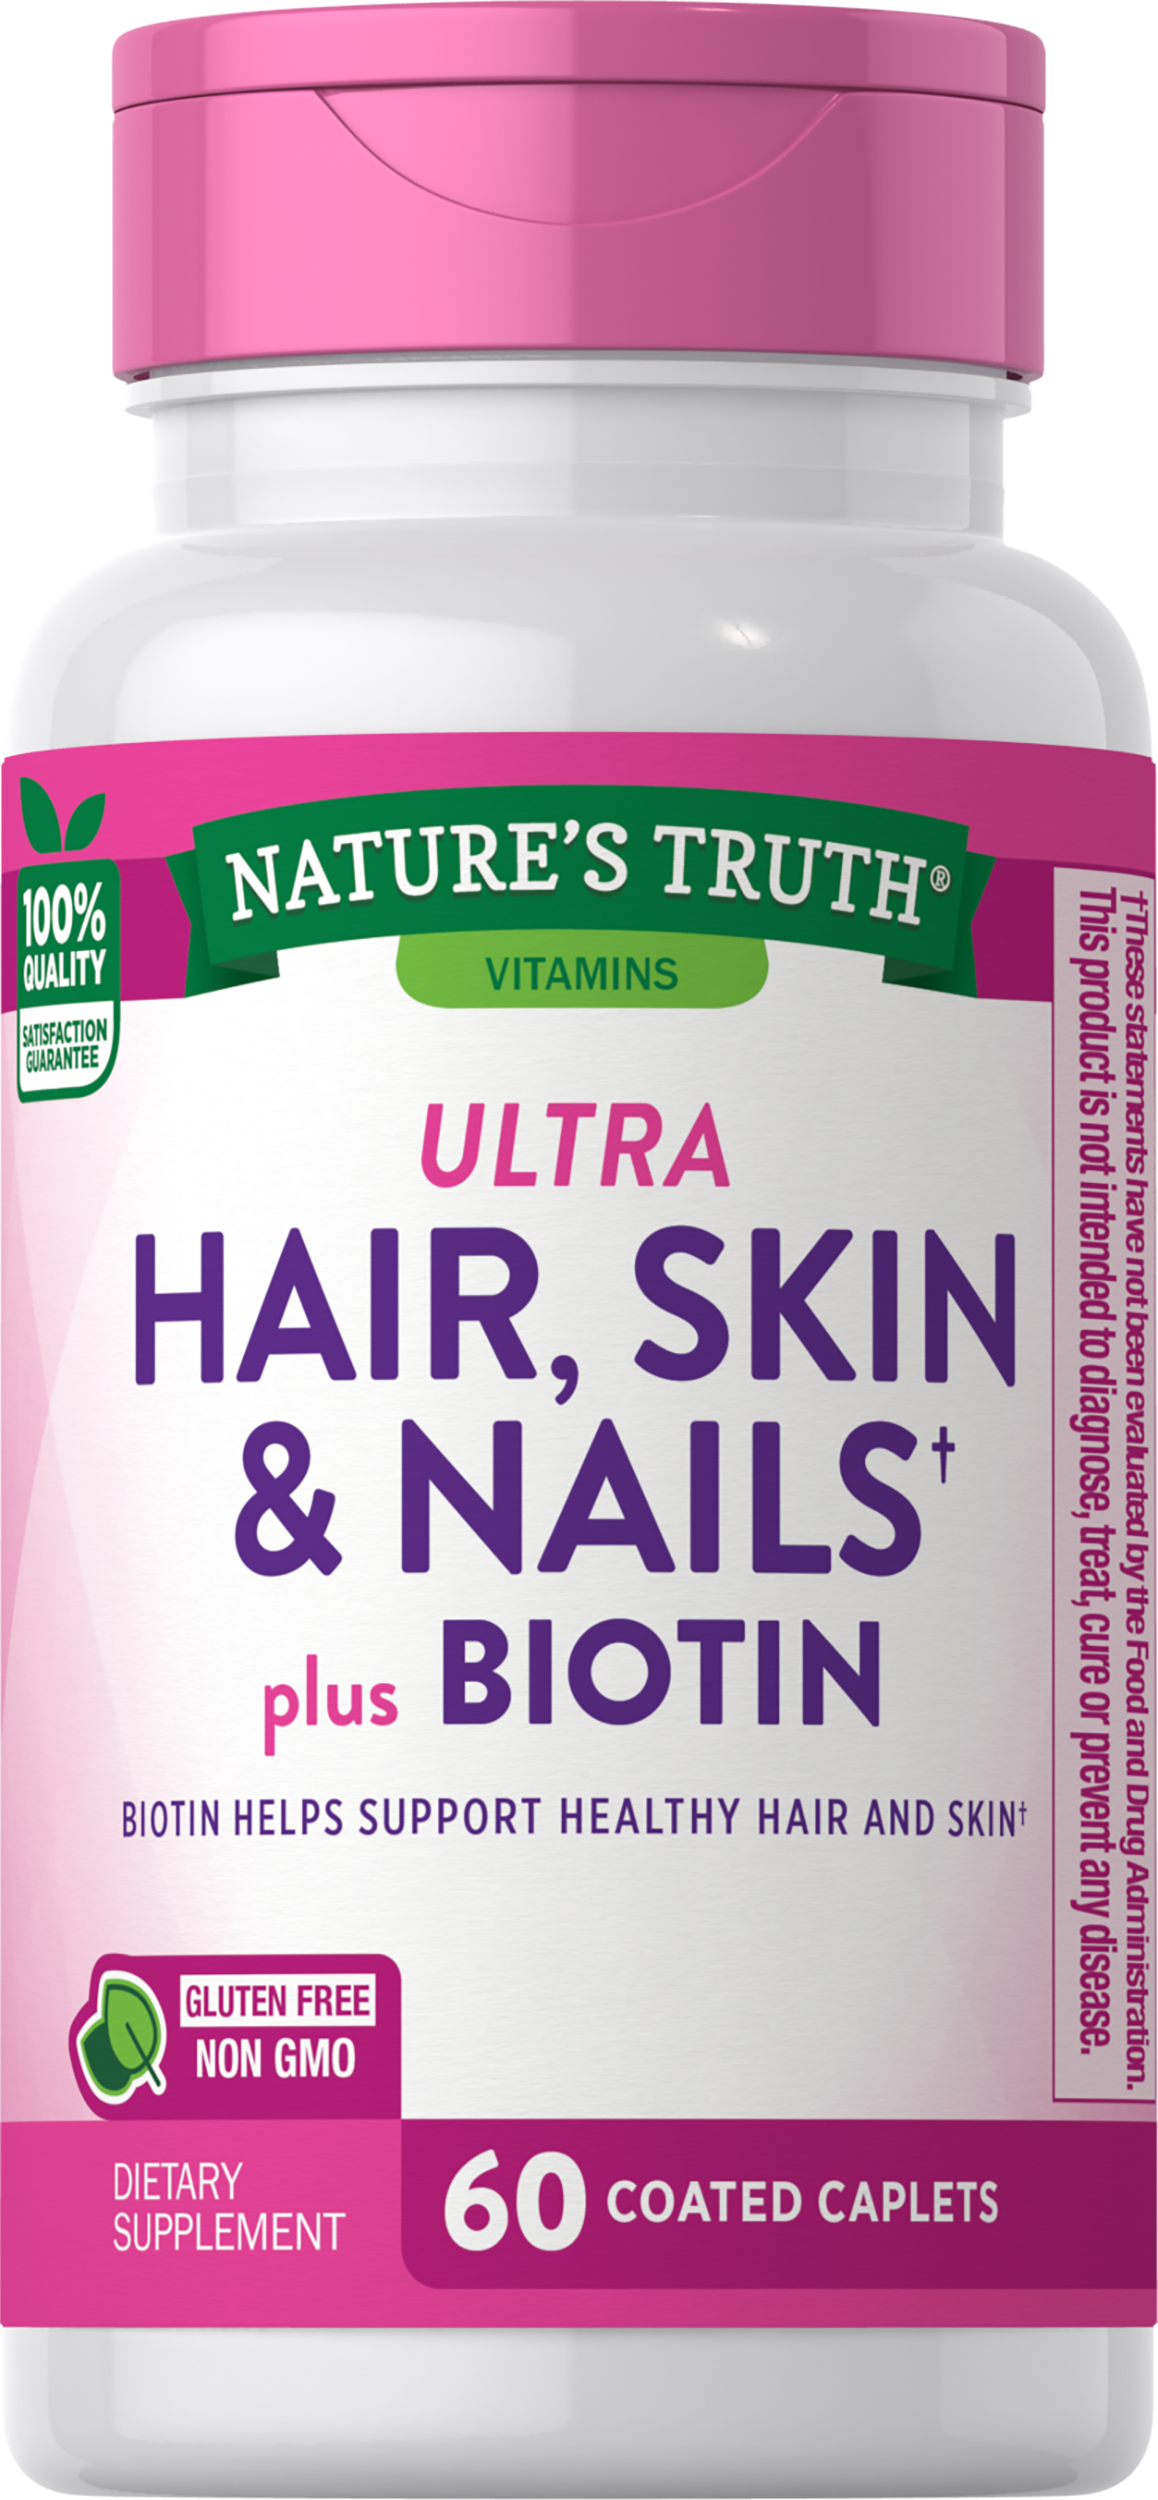 Hair Skin and Nails Vitamins with Biotin, Collagen